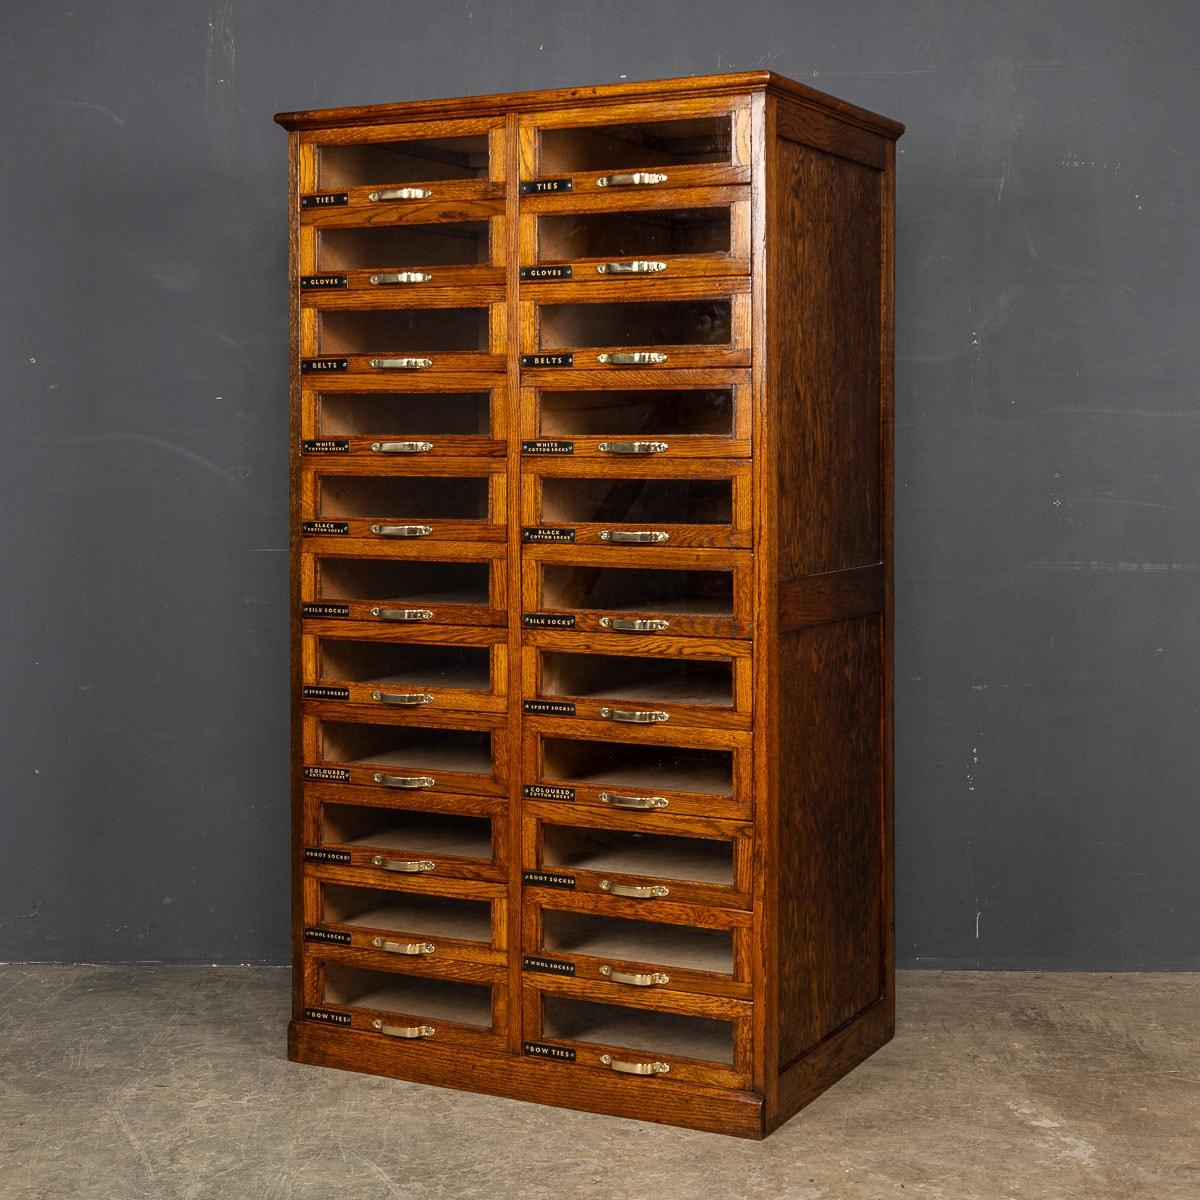 An antique English oak haberdashery with twenty two glass fronted drawers with original brass handles and later painted labels. As functional as it is visually captivating, it not only serves a practical purpose but also stands as a marvellous